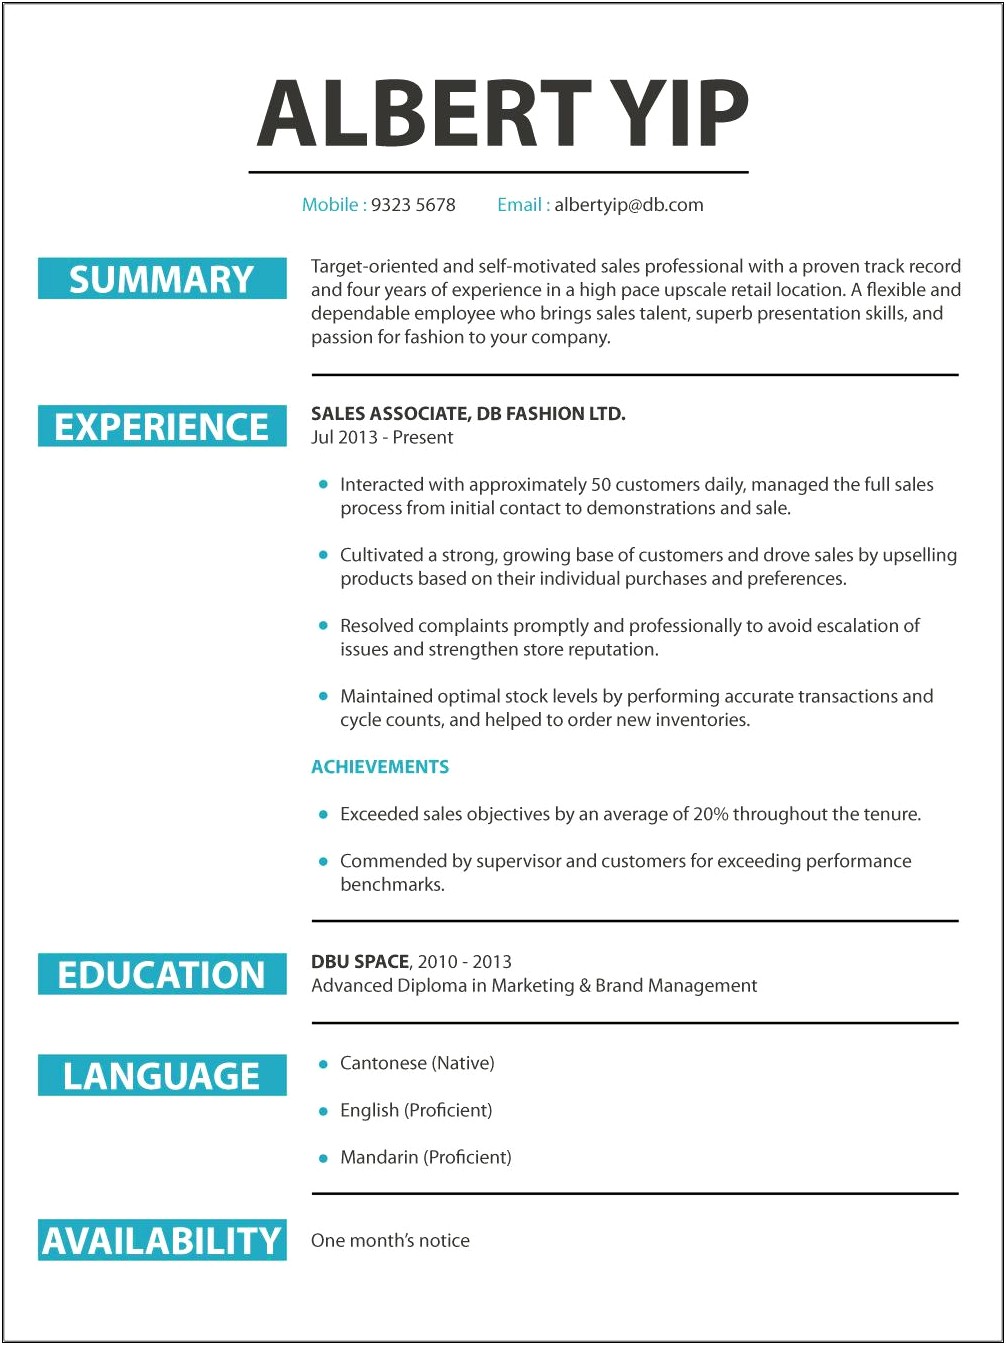 Sample Resume For High End Retail Sales